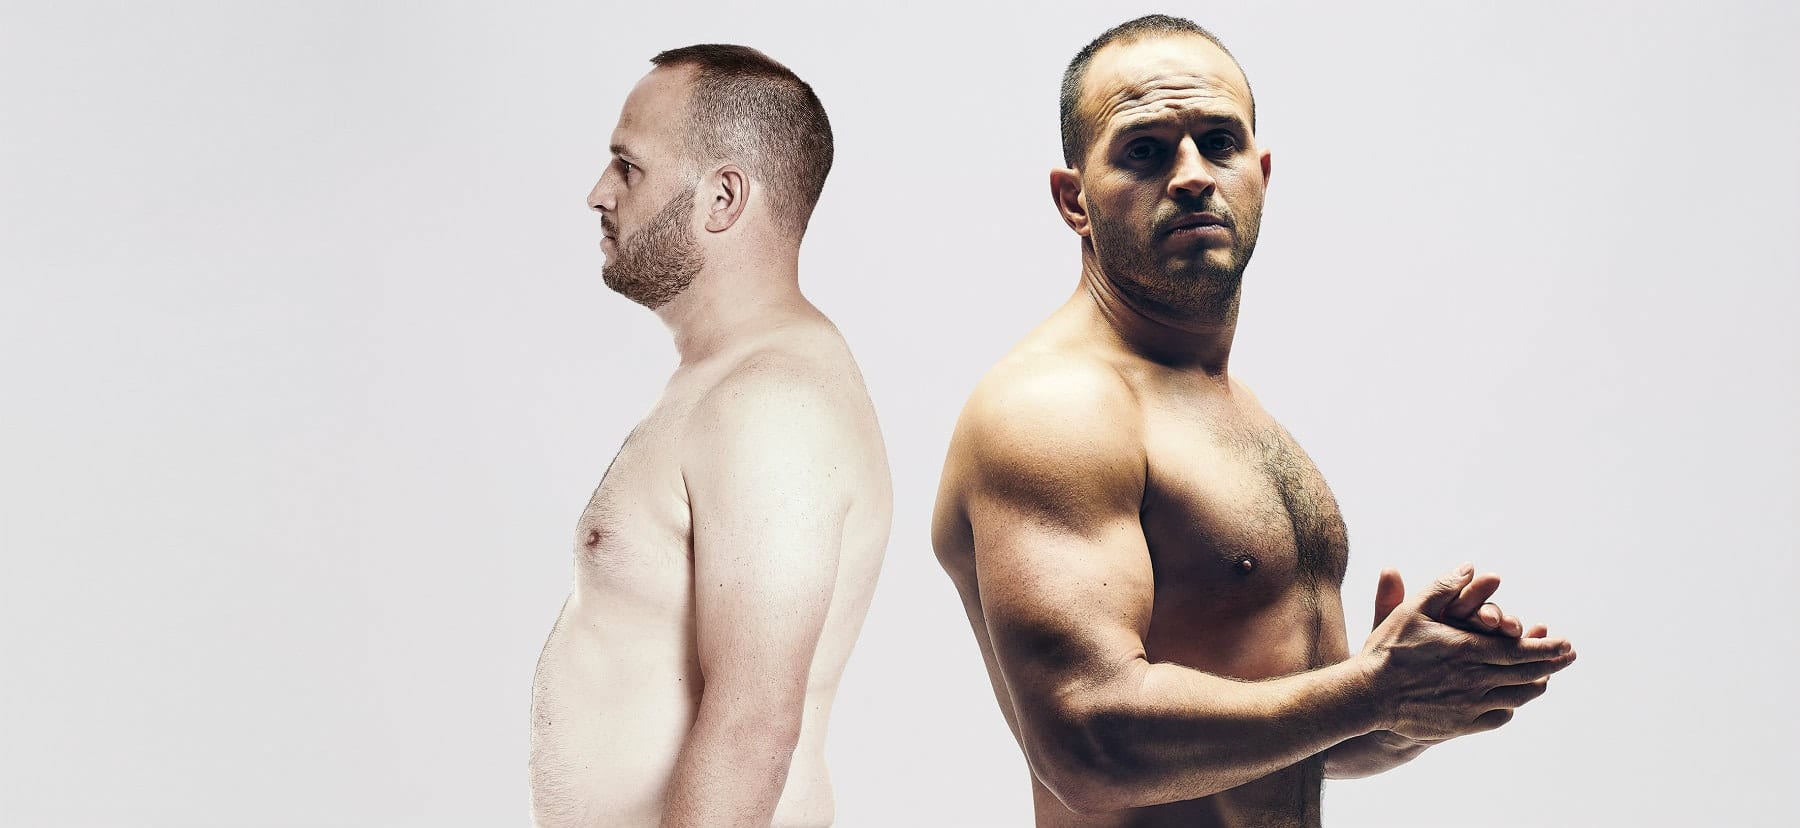 Build A Body For Life | 12-Week Transformation | Men’s Health X Myprotein